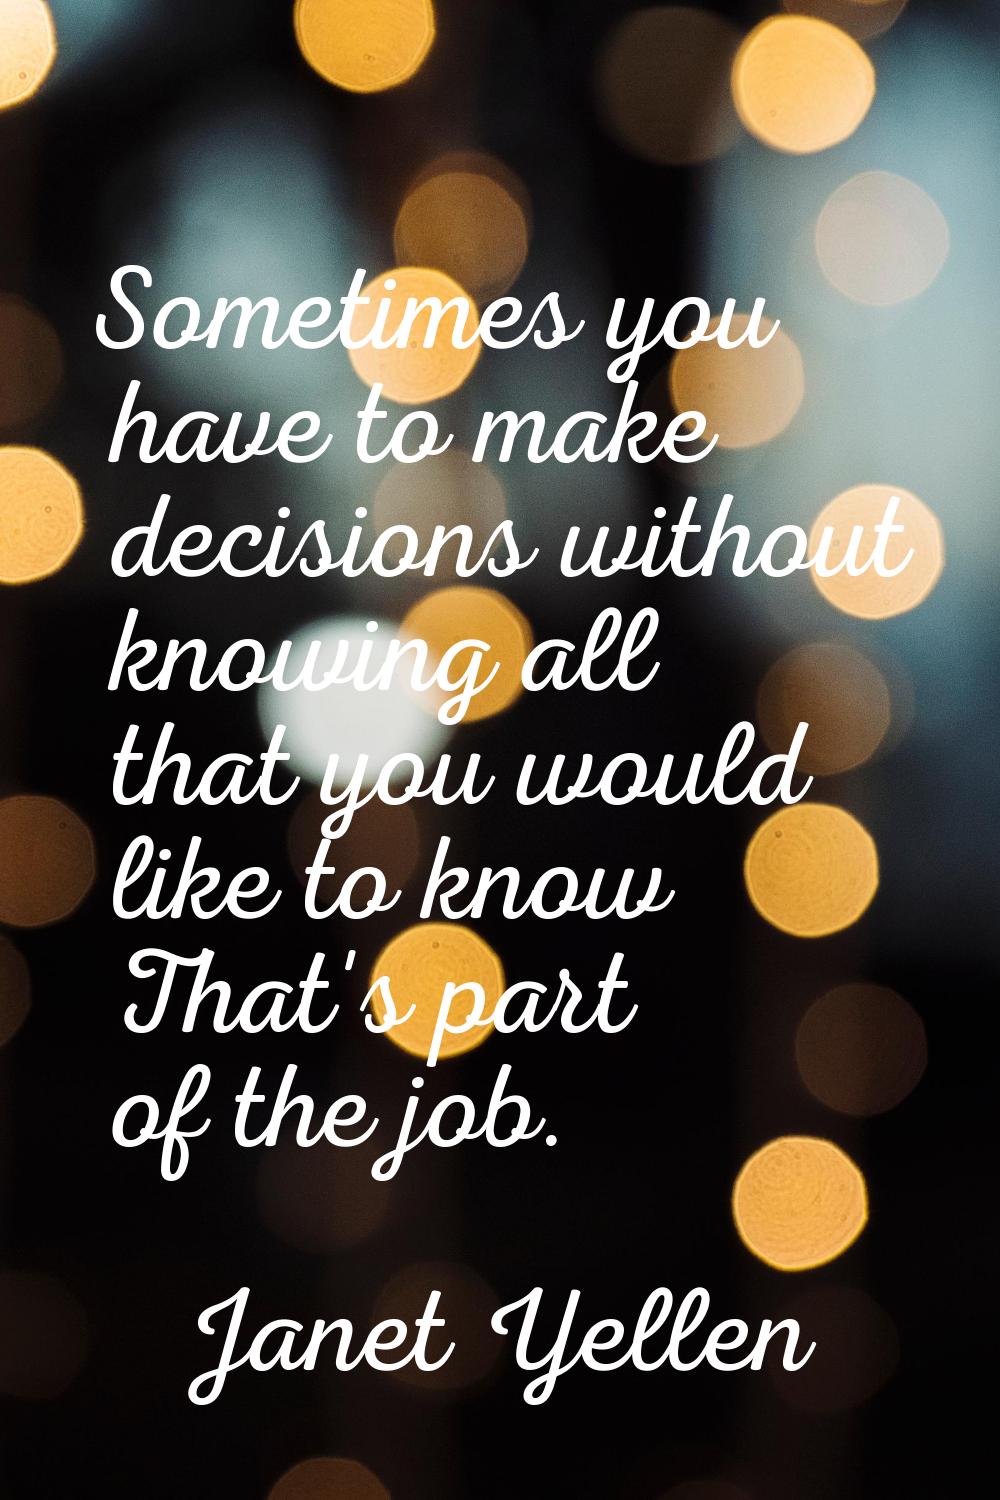 Sometimes you have to make decisions without knowing all that you would like to know That's part of